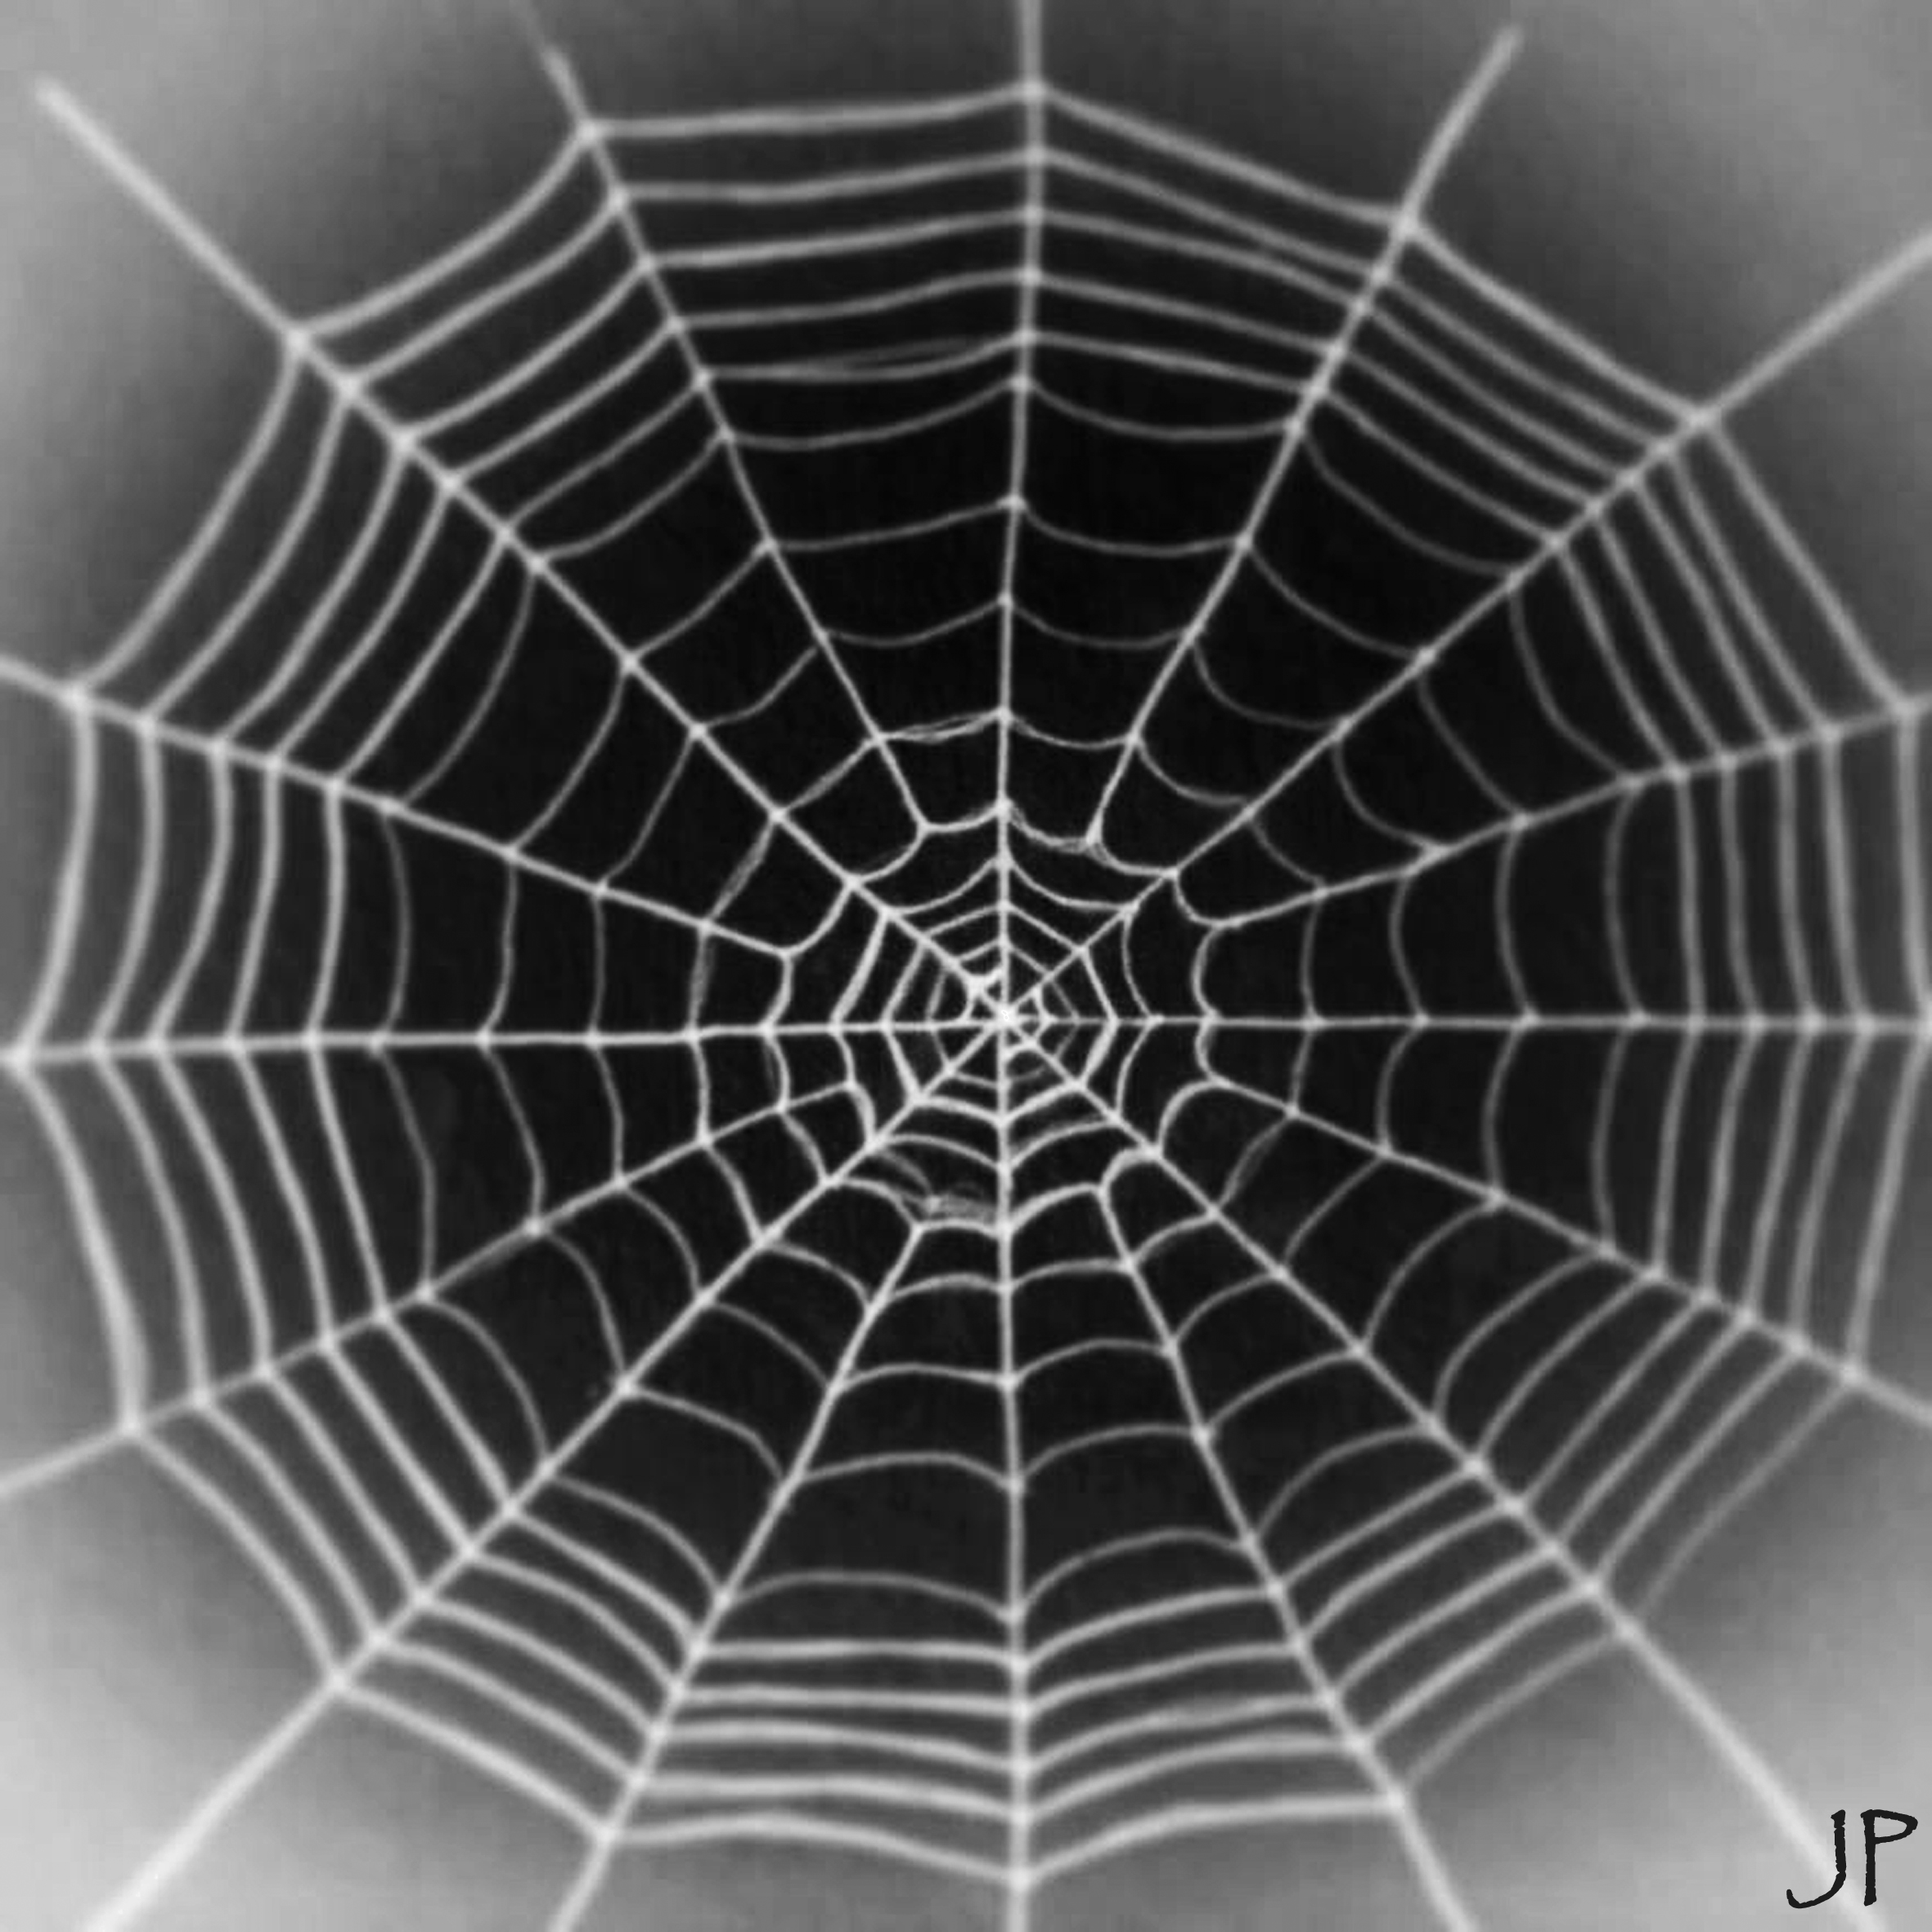 BWScience » Should We Really Fear Spider Webs at Halloween?